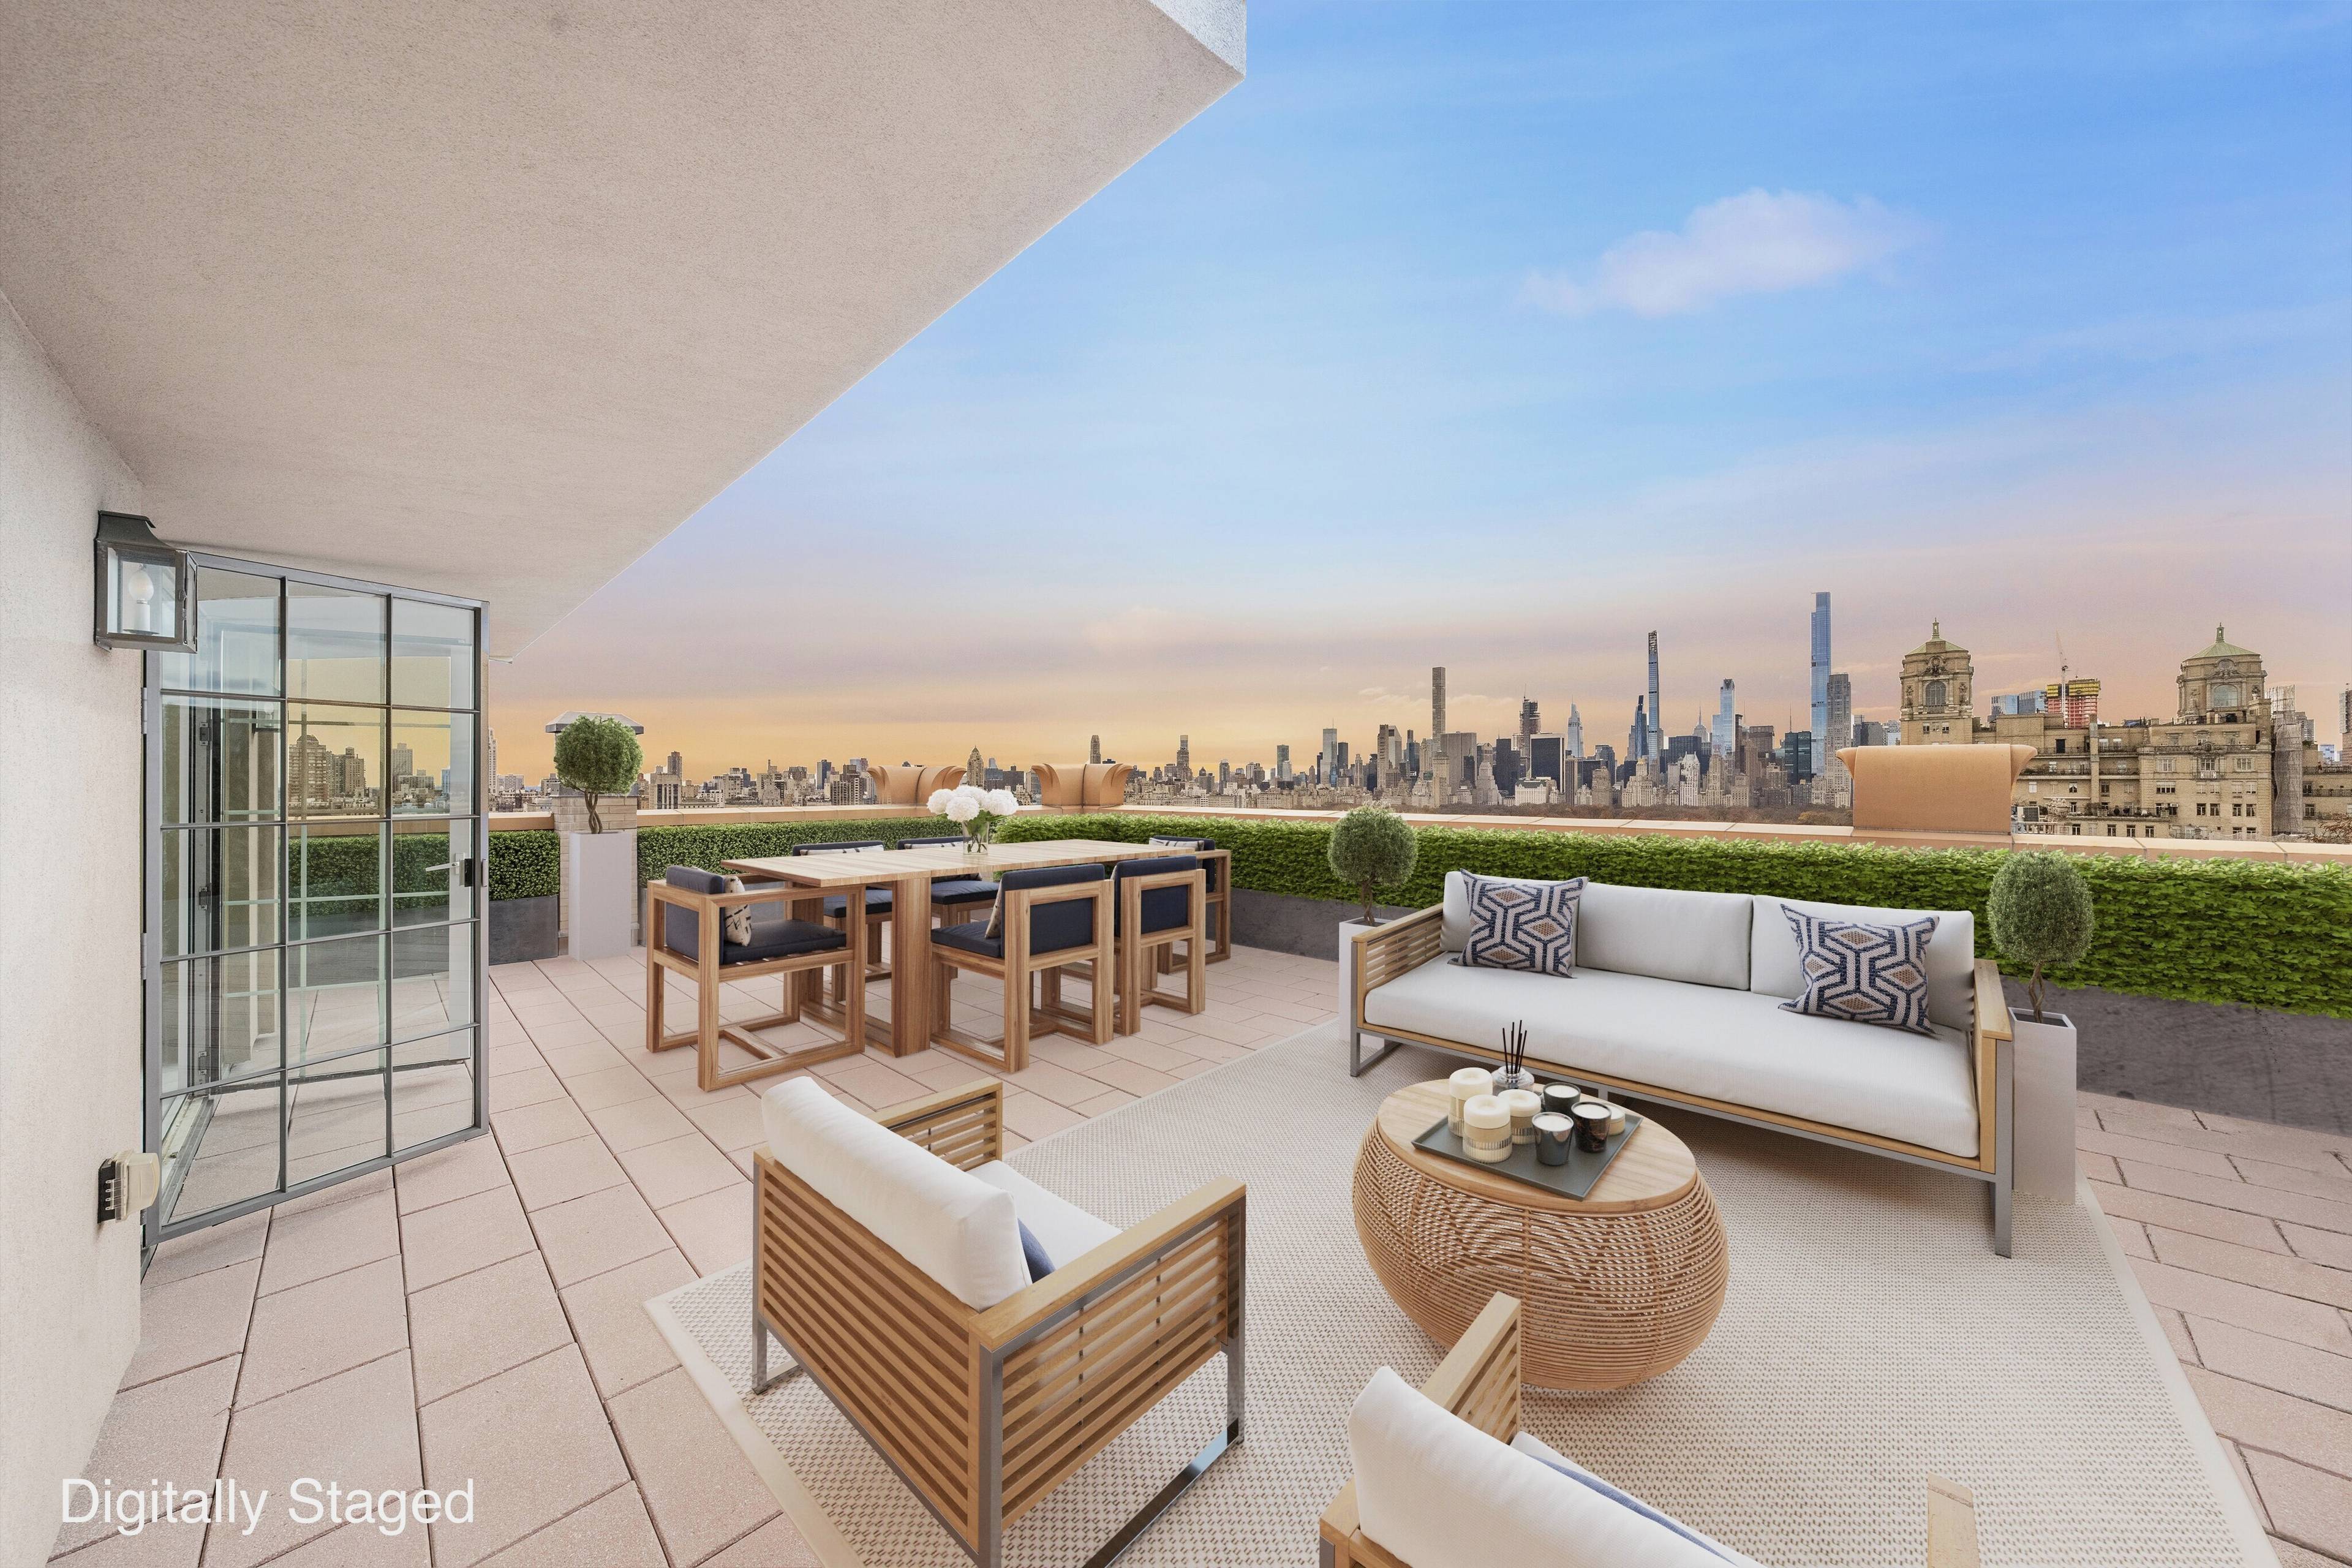 The Rudin Family Penthouse on CPW Welcome to the ultimate New York City apartment, a Prewar Penthouse on Central Park West.